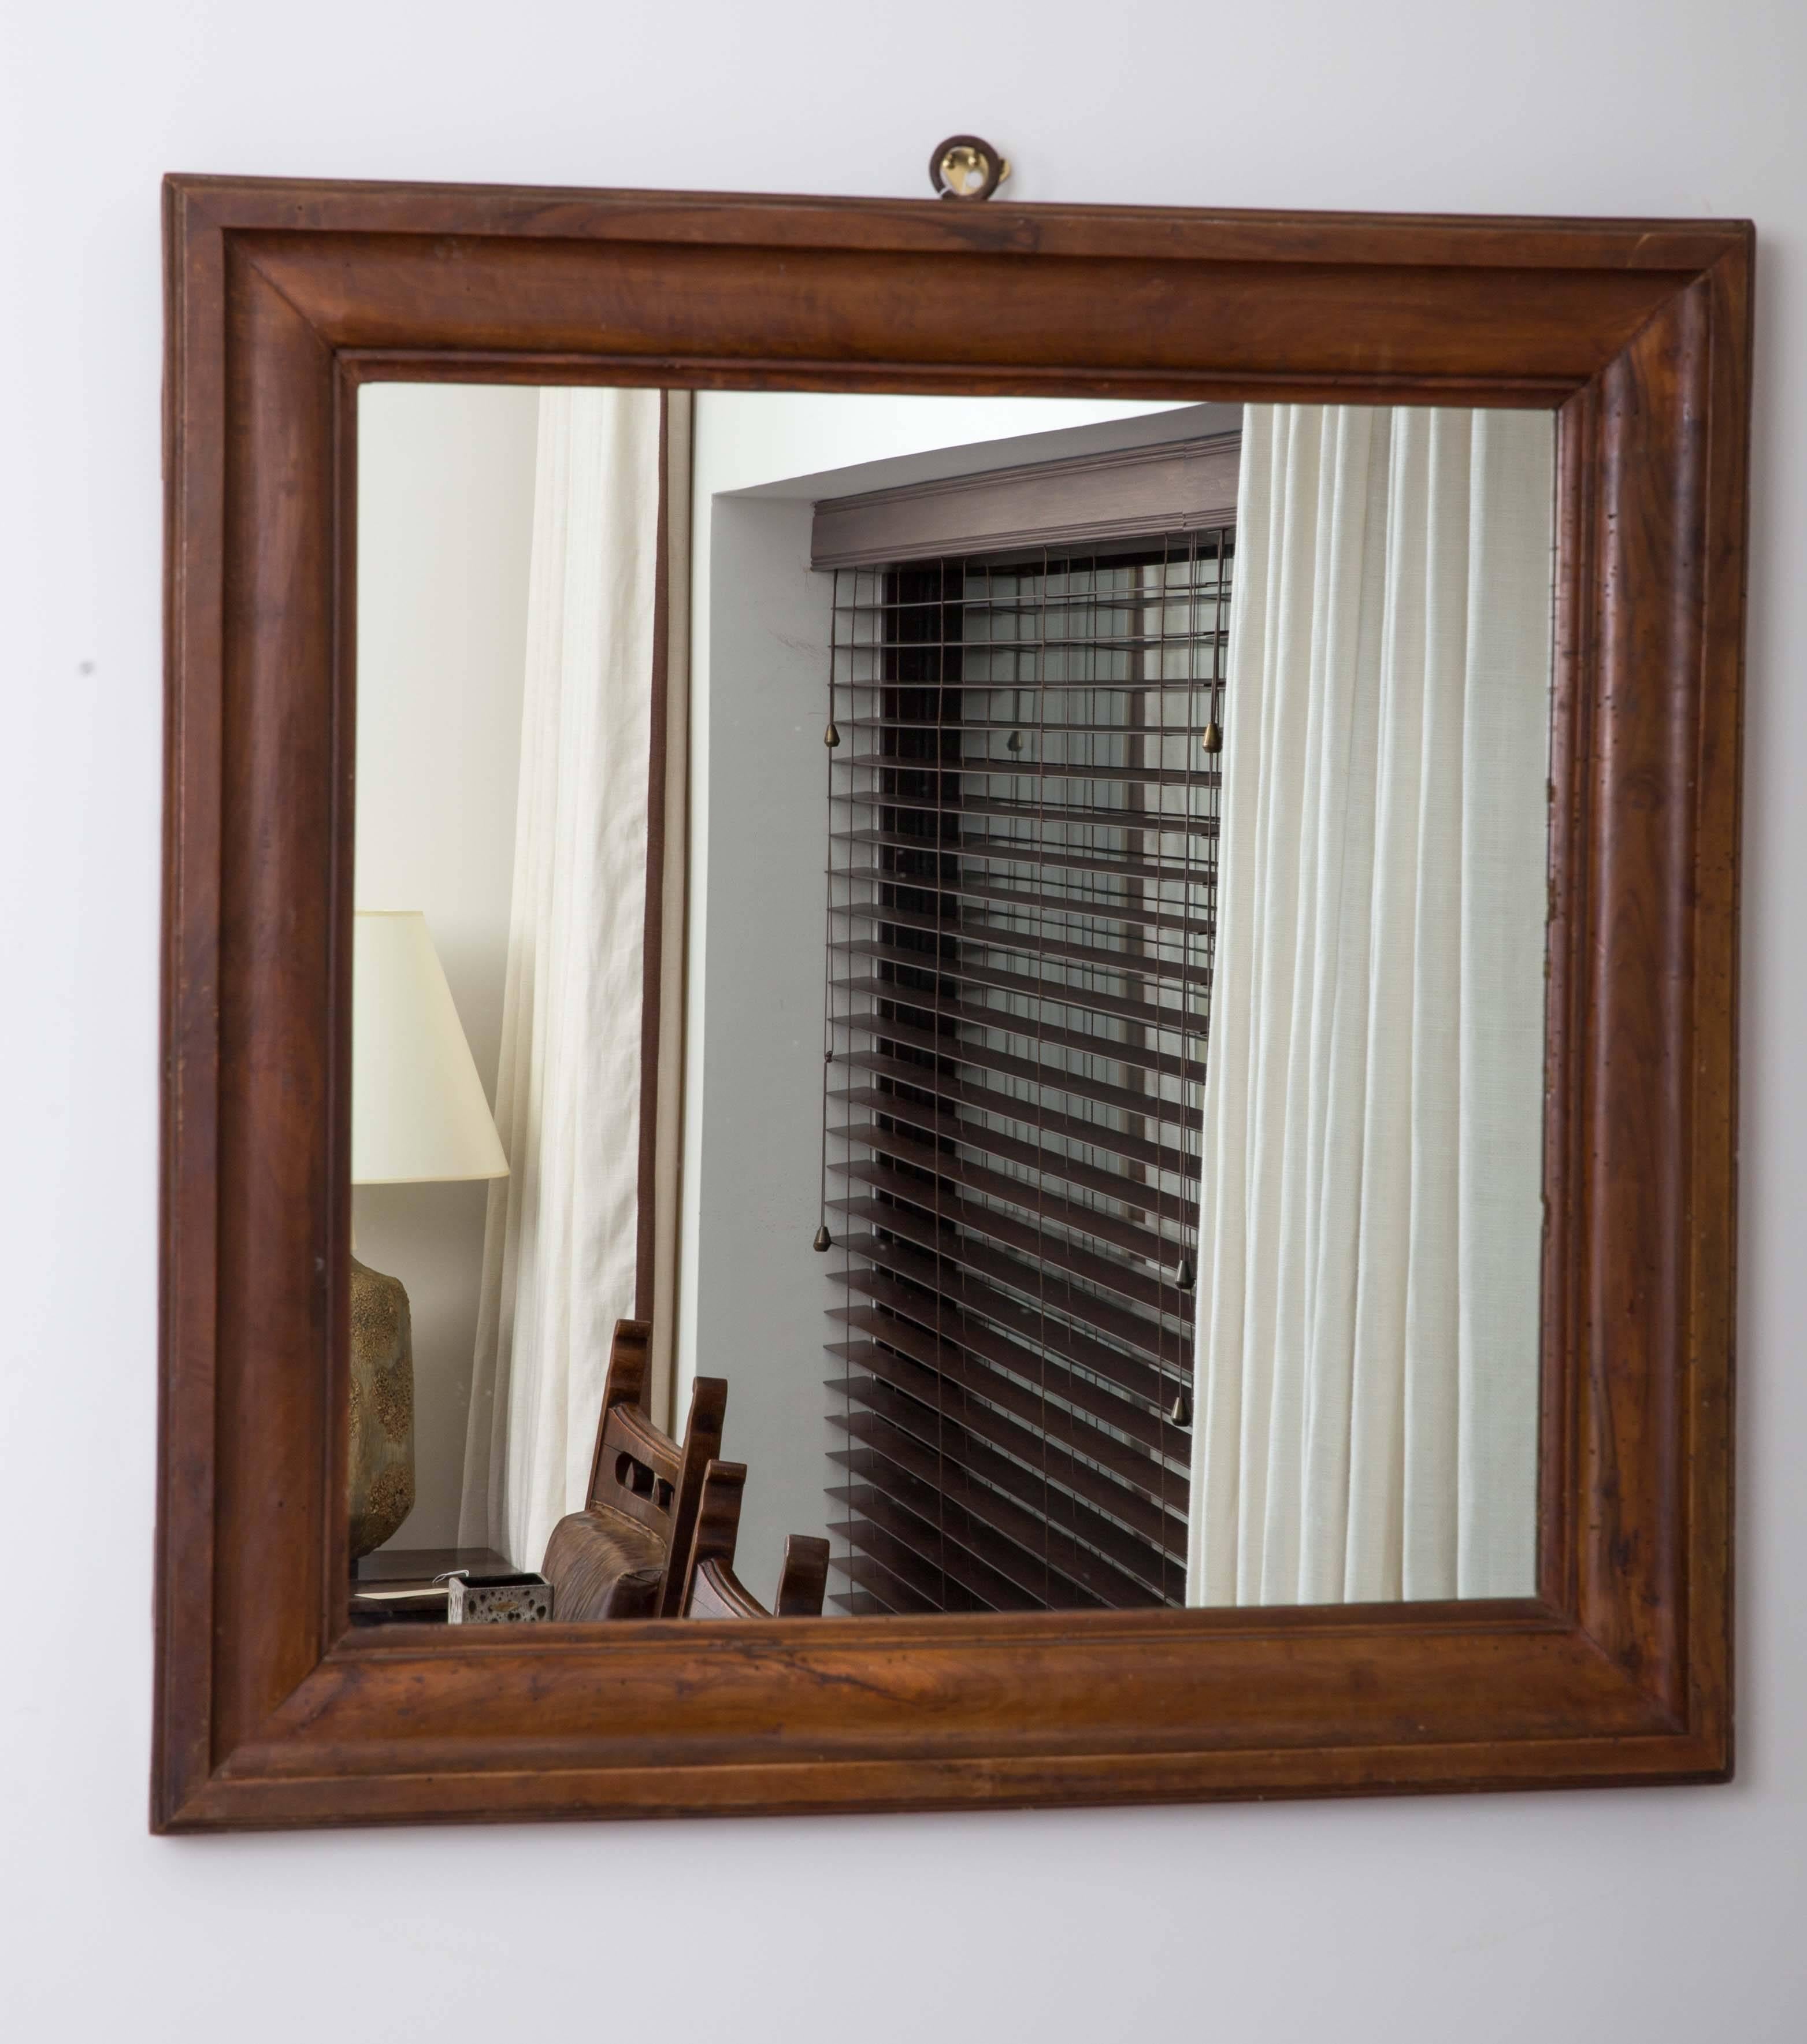 Walnut framed mirror, with metal hook on top.